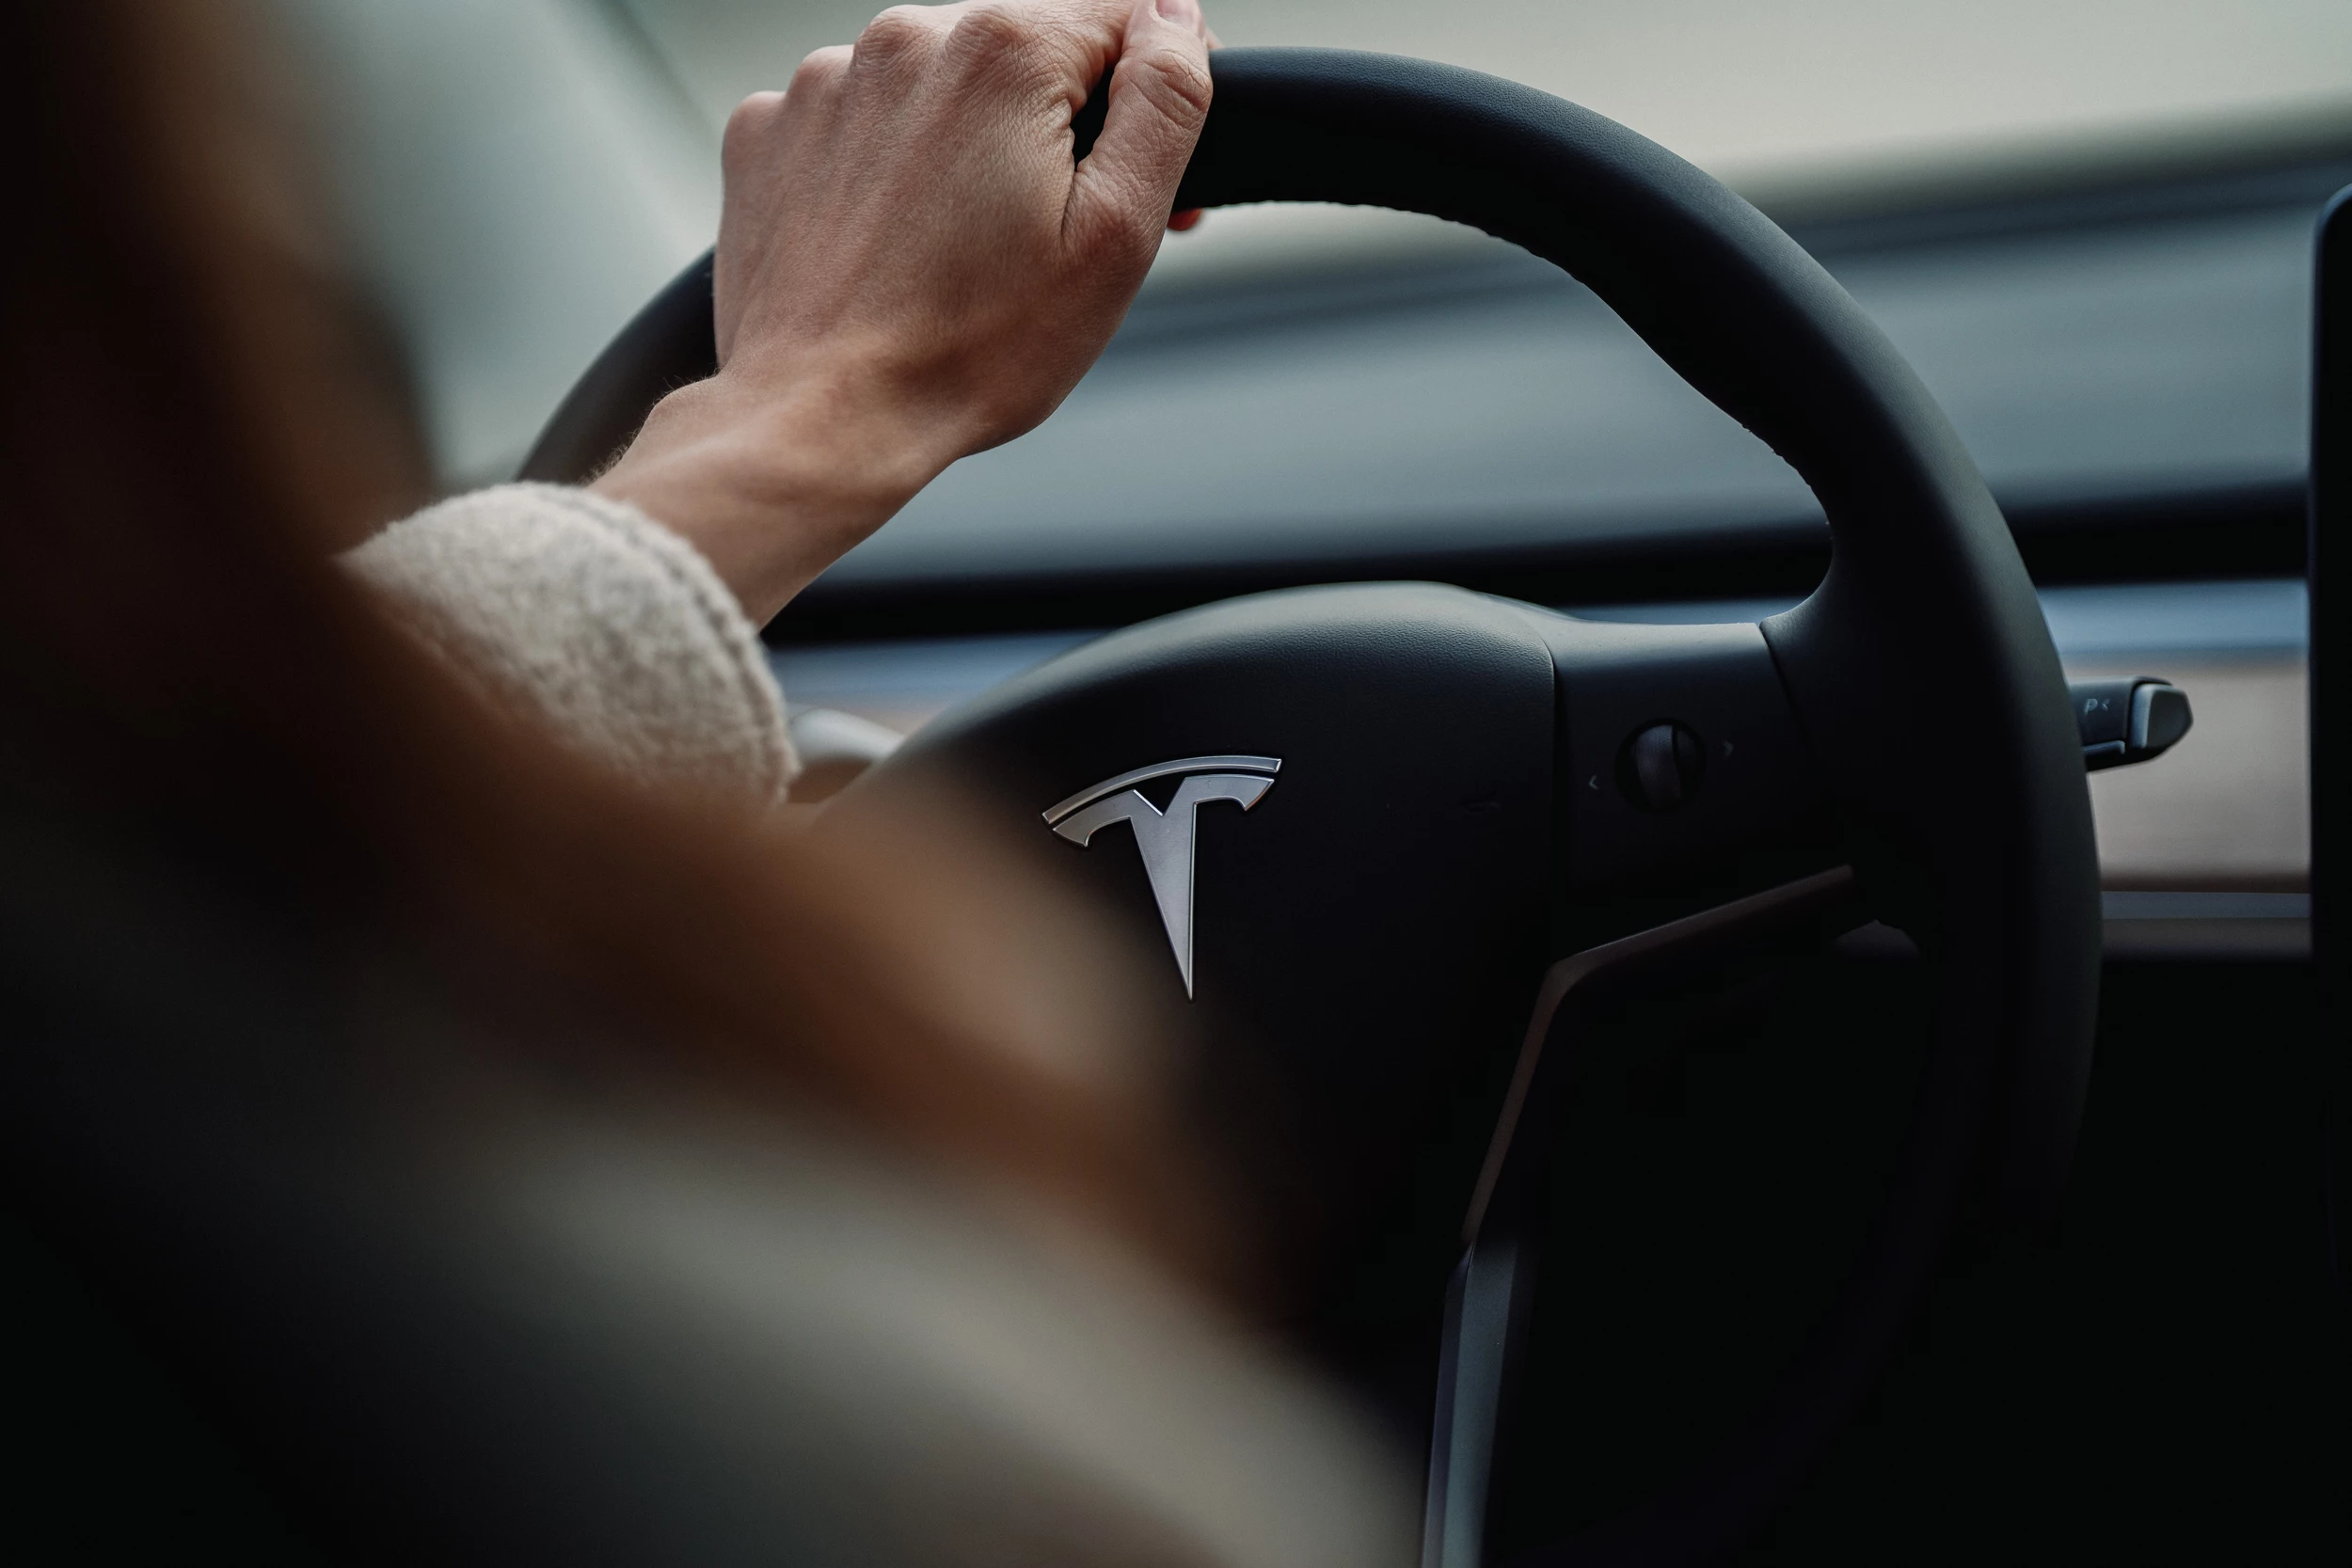 Over 1M Teslas recalled because windows can pinch fingers